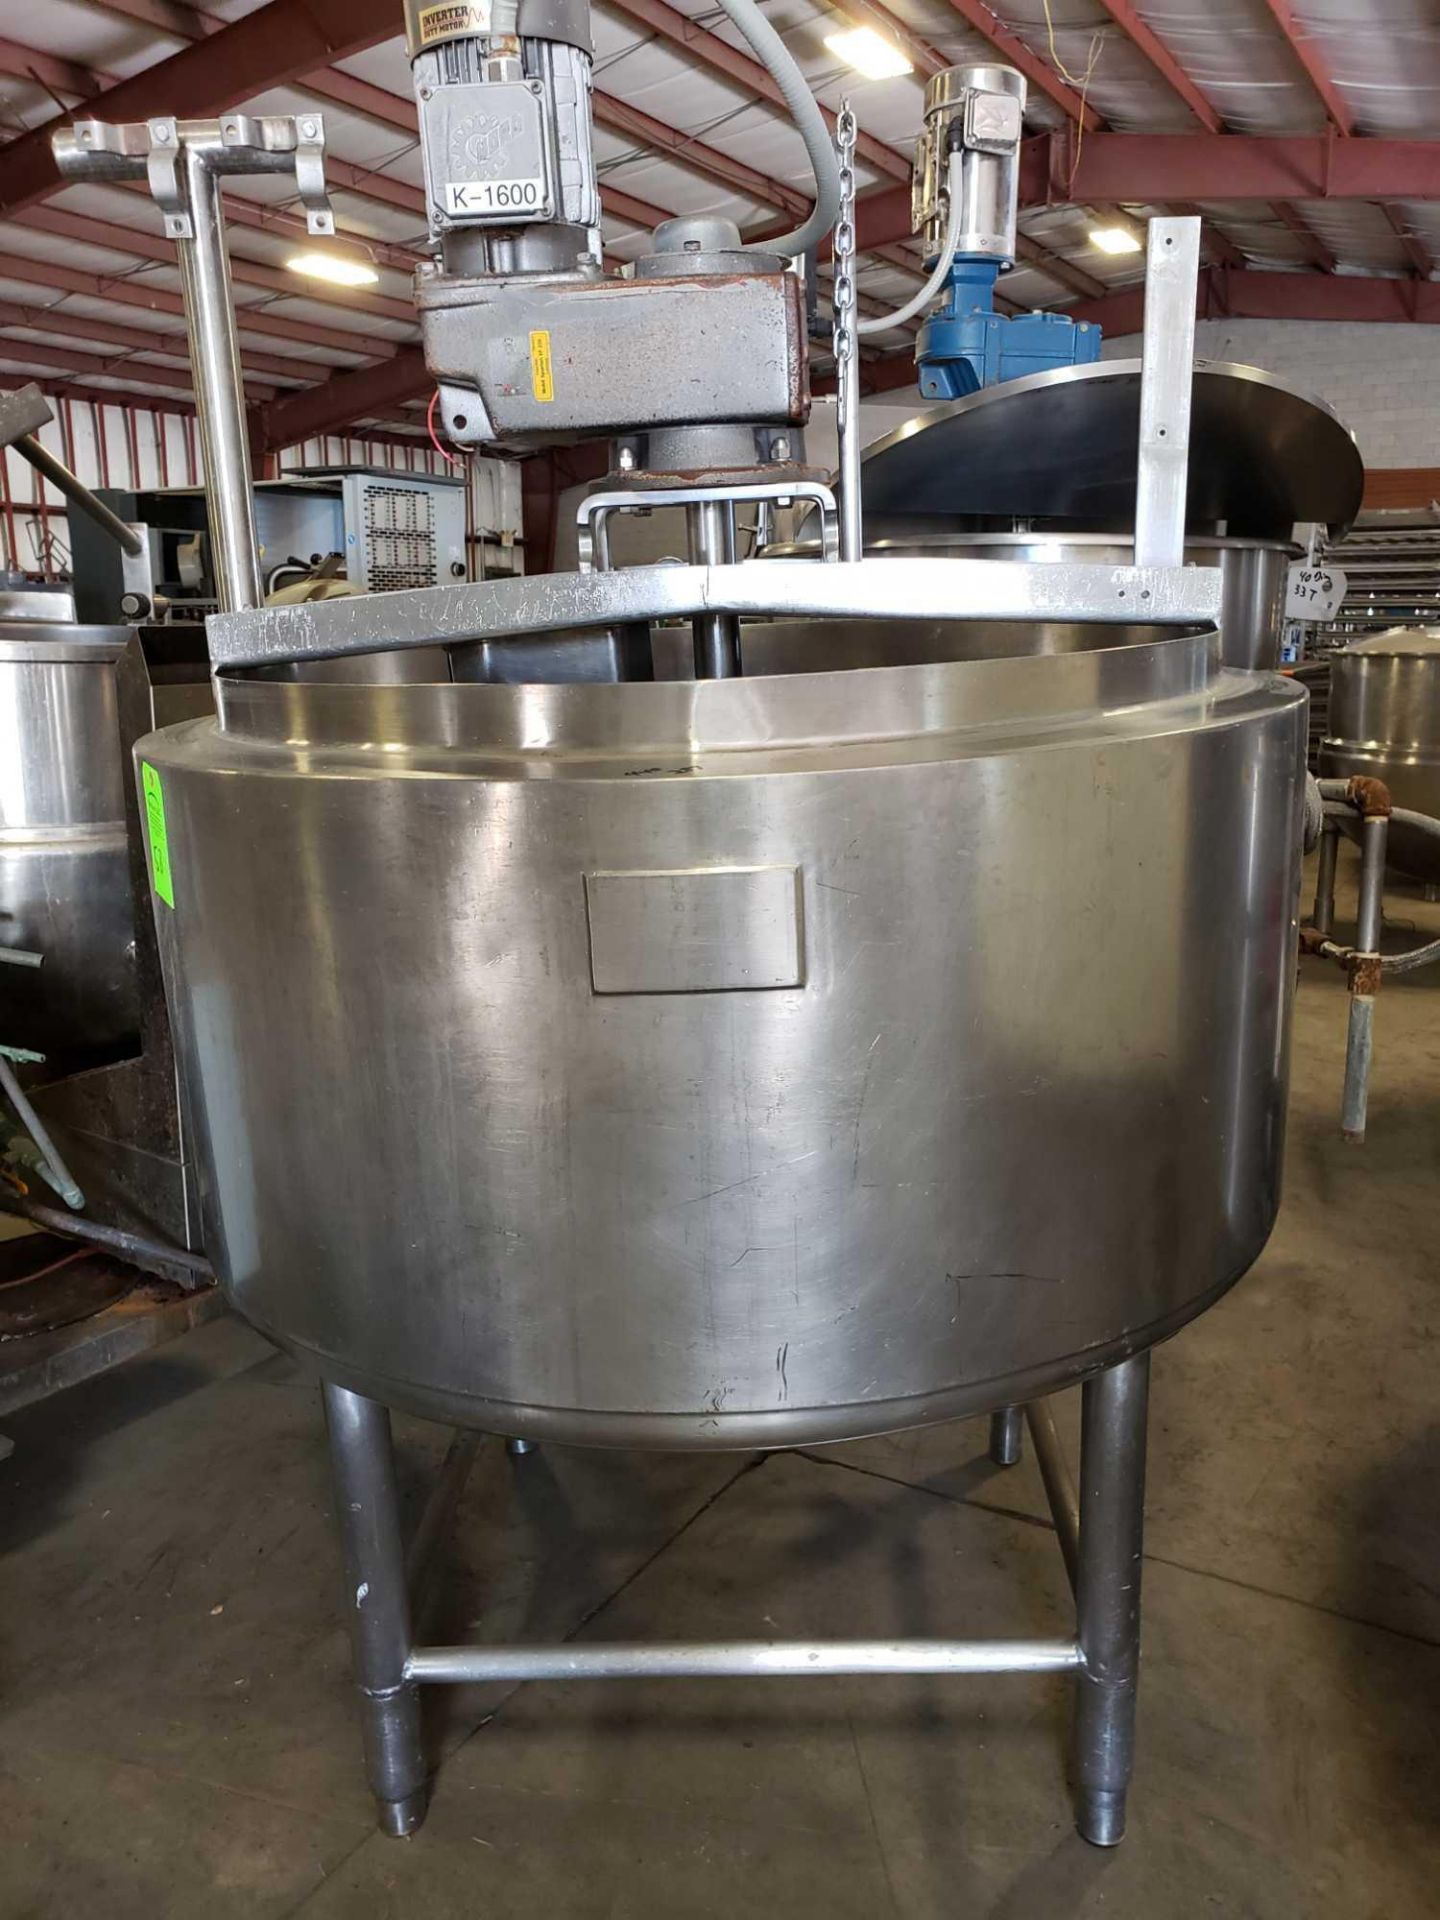 120 gallon Stainless steel jacketed mixer kettle, 48" diameter, 28" interior depth, 2010 model year. - Image 3 of 12